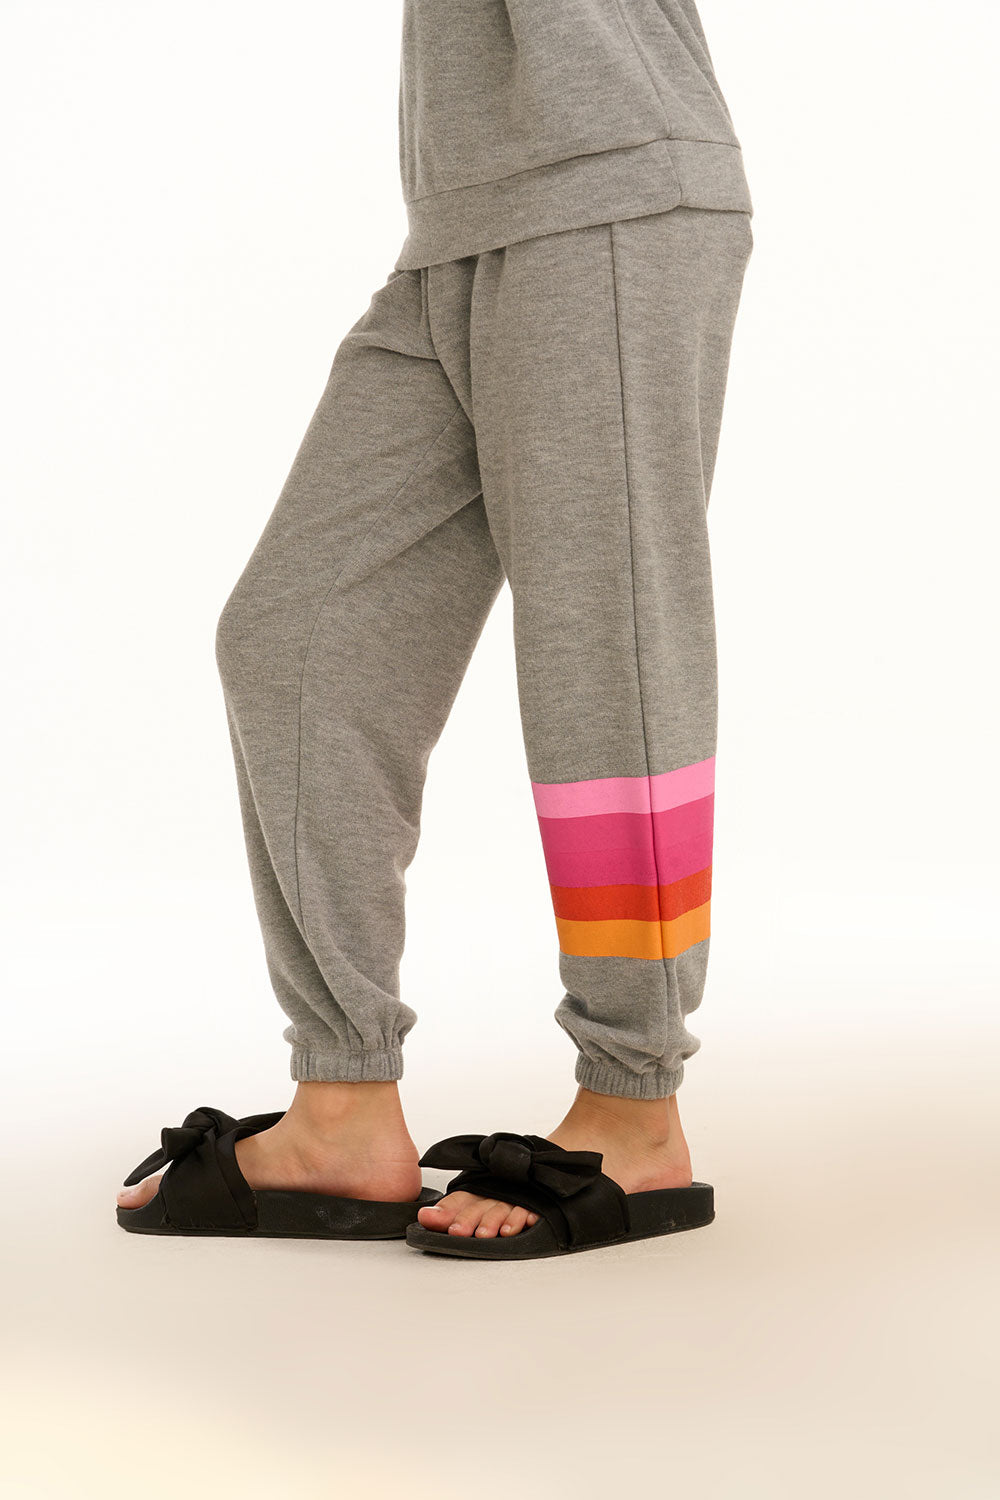 One Love Sweatpants GIRLS chaserbrand